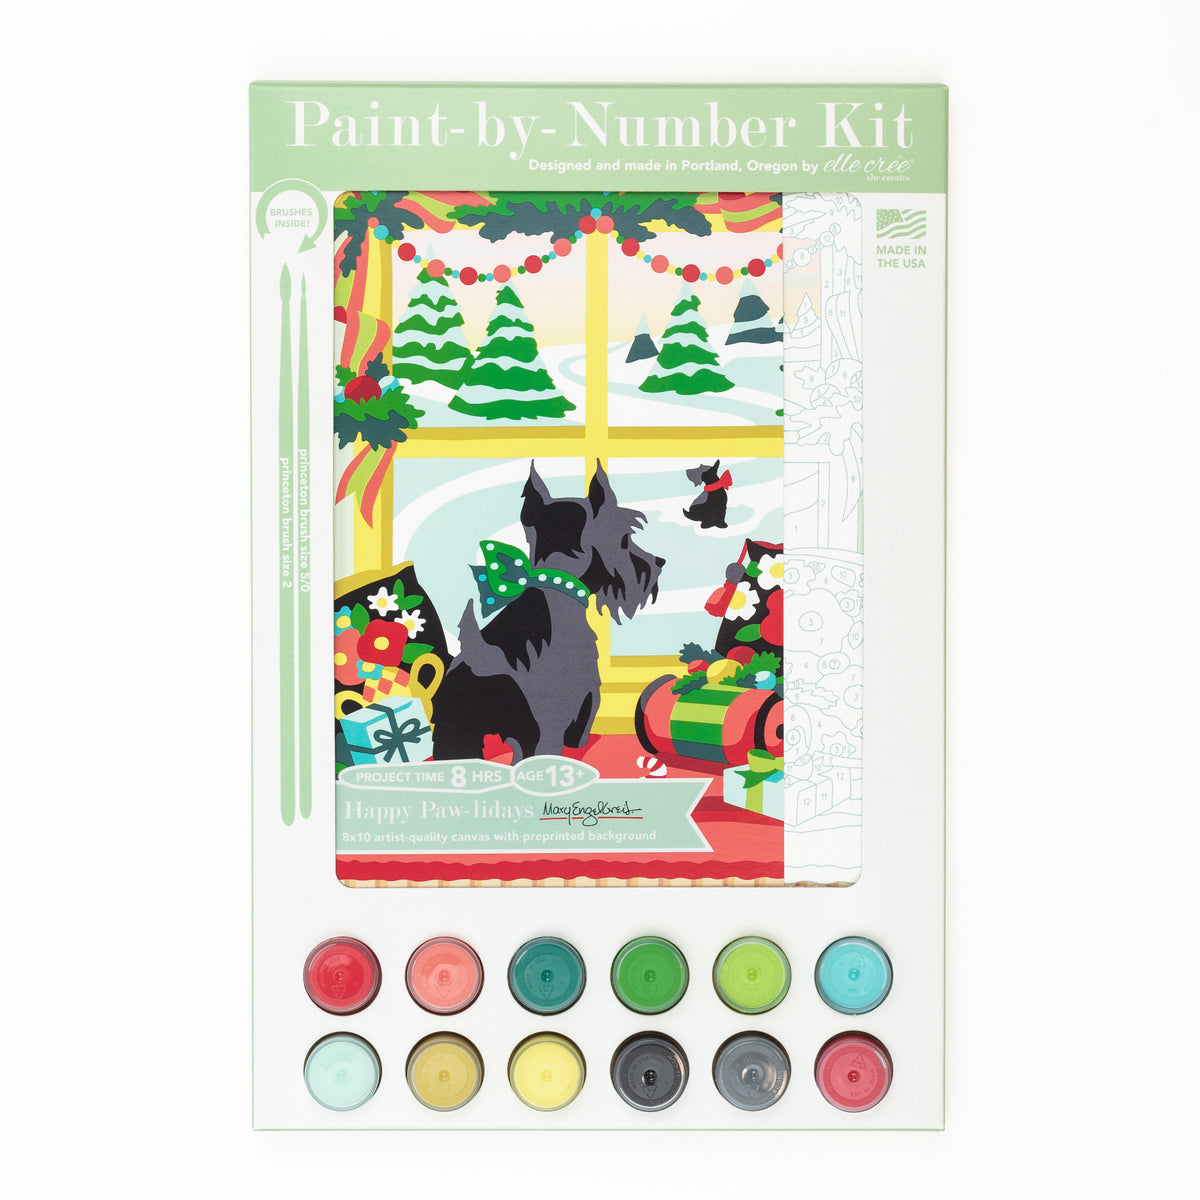 Engelblooms Paint-by-Number Kit